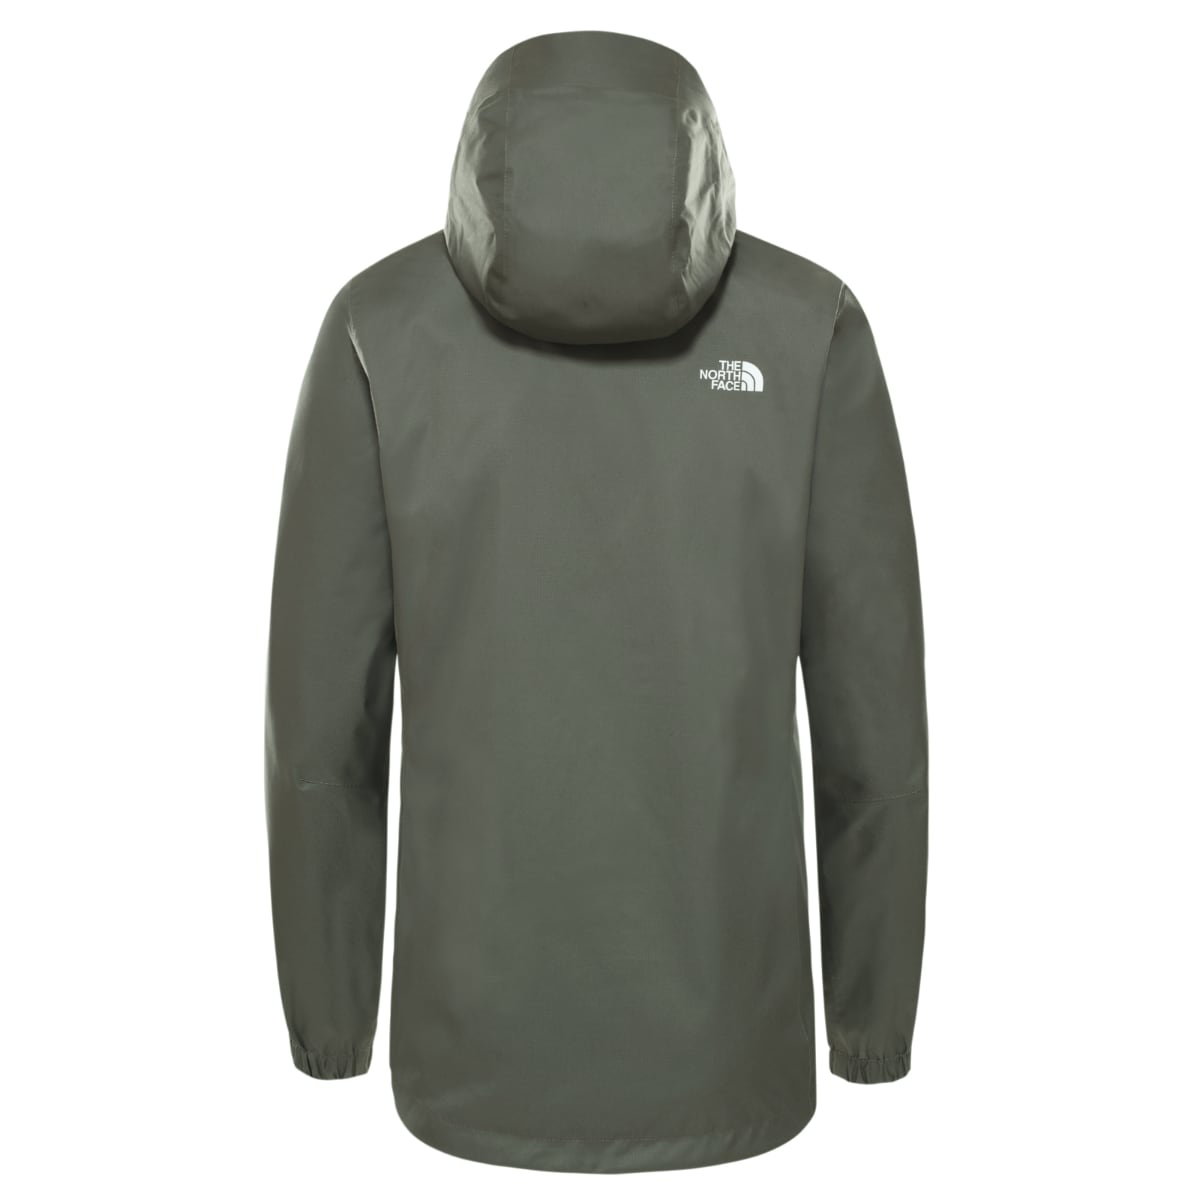 The North Face Quest Waterproof Women's Jacket | New Taupe Green